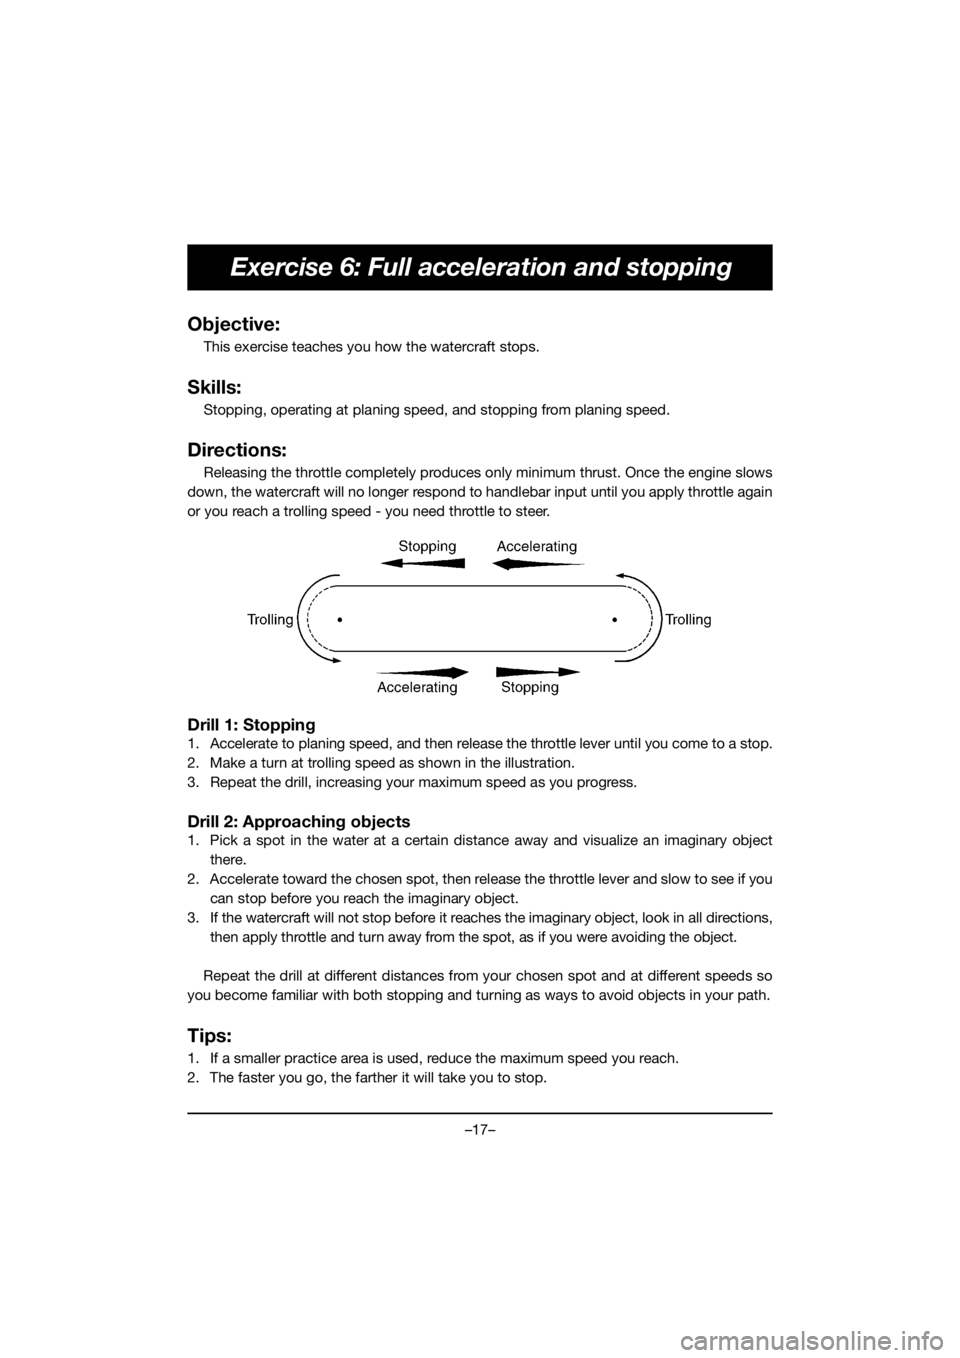 YAMAHA EX SPORT 2020  Owners Manual –17–
Exercise 6: Full acceleration and stopping
Objective:
This exercise teaches you how the watercraft stops. 
Skills:
Stopping, operating at planing speed, and stopping from planing speed.
Direc